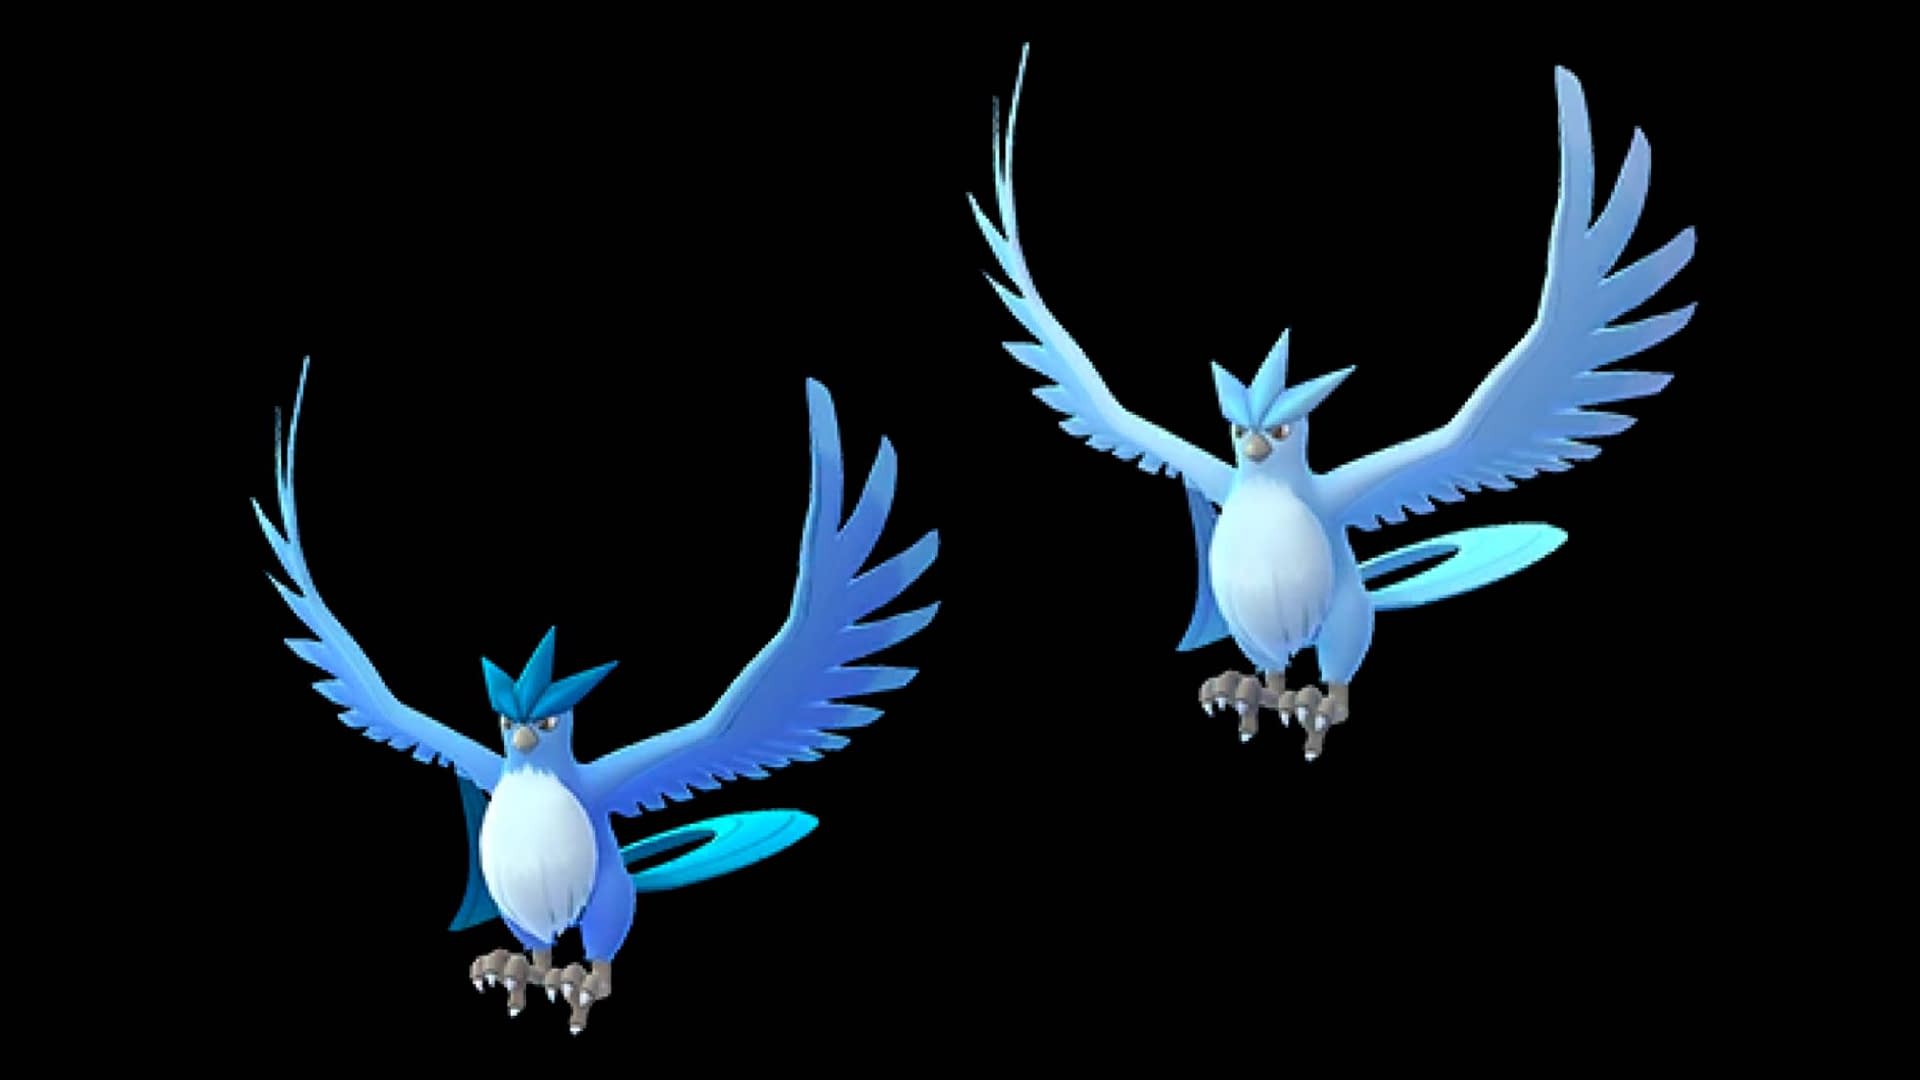 Shiny Articuno after 7,602 SRs in Fire Red!! Legendary Birds Completed! 